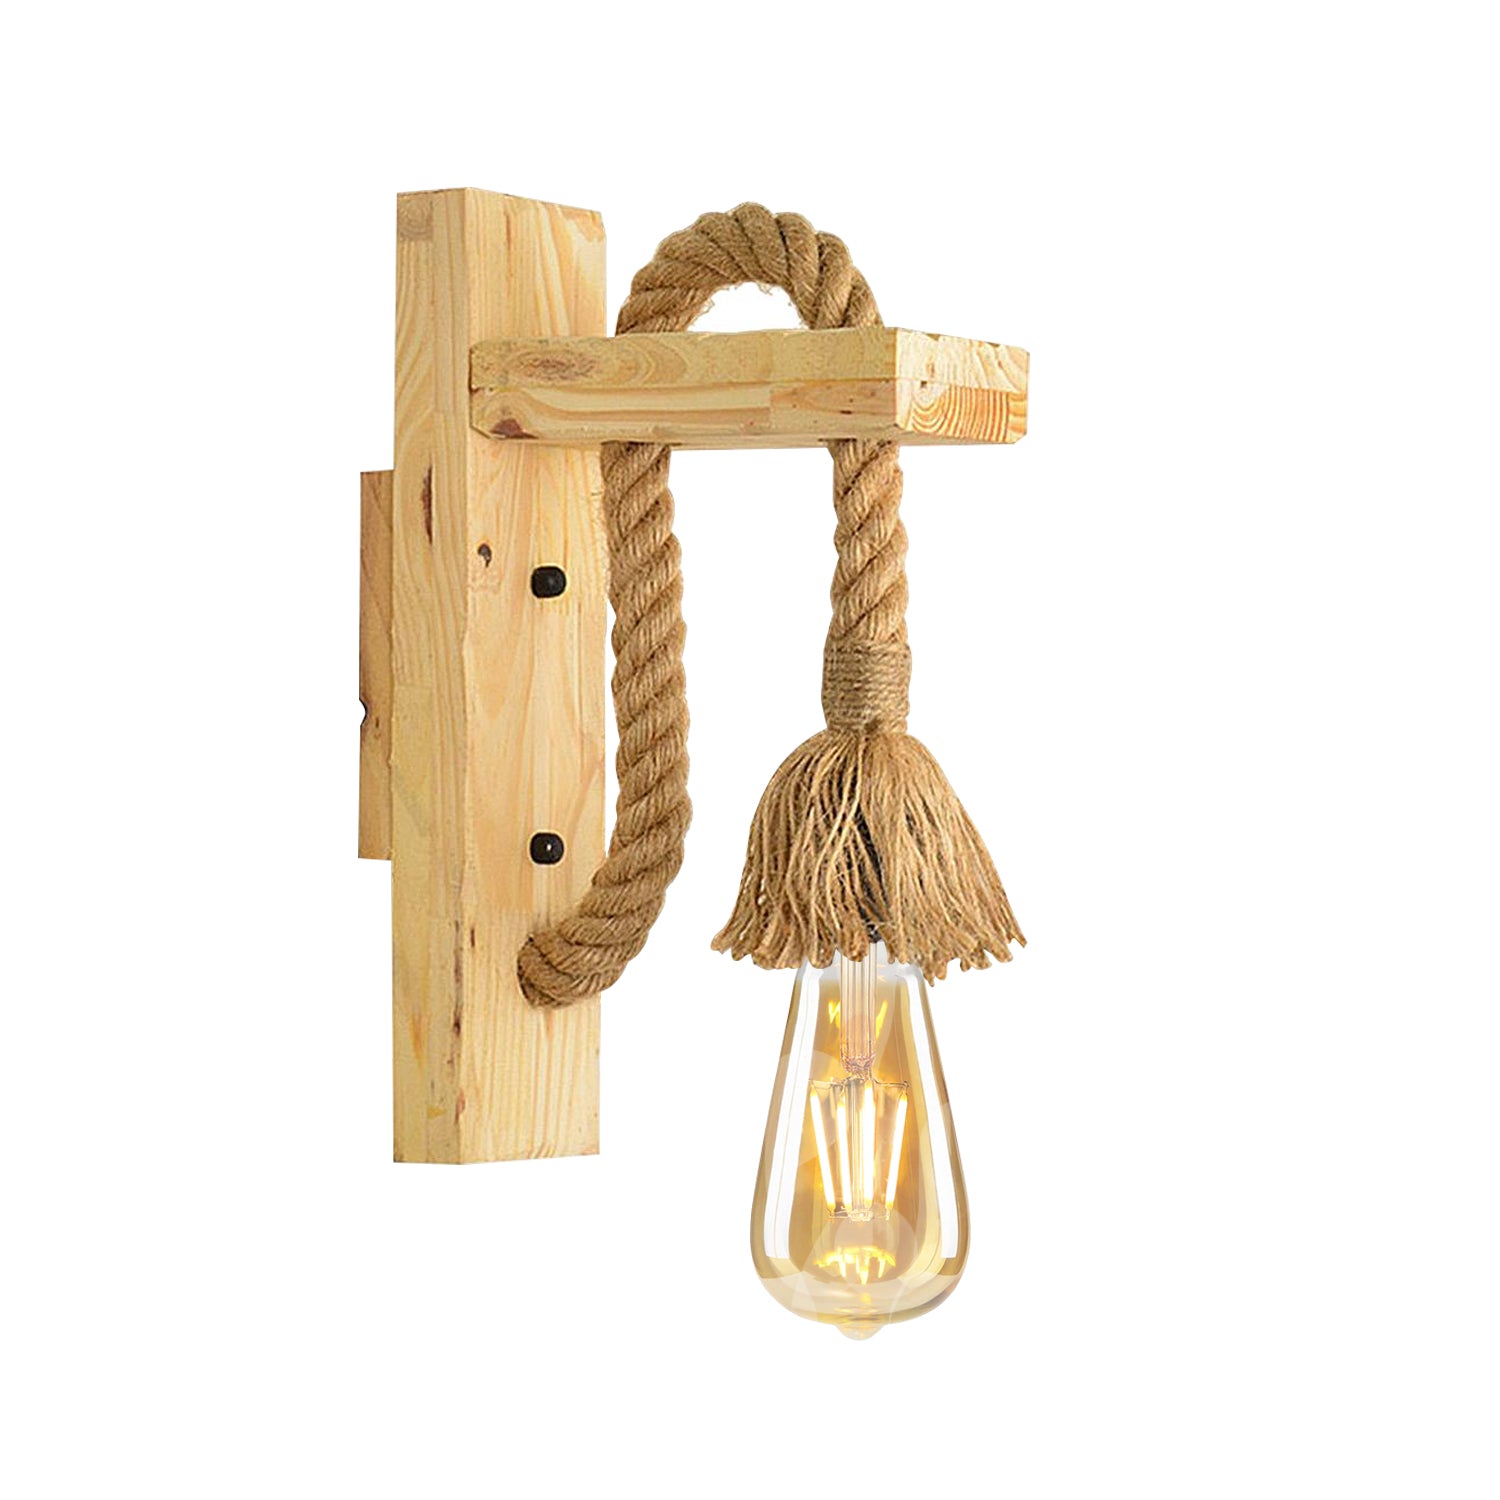 Vintage Wooden Hemp Rope Wall Sconce Light with Retro Appeal